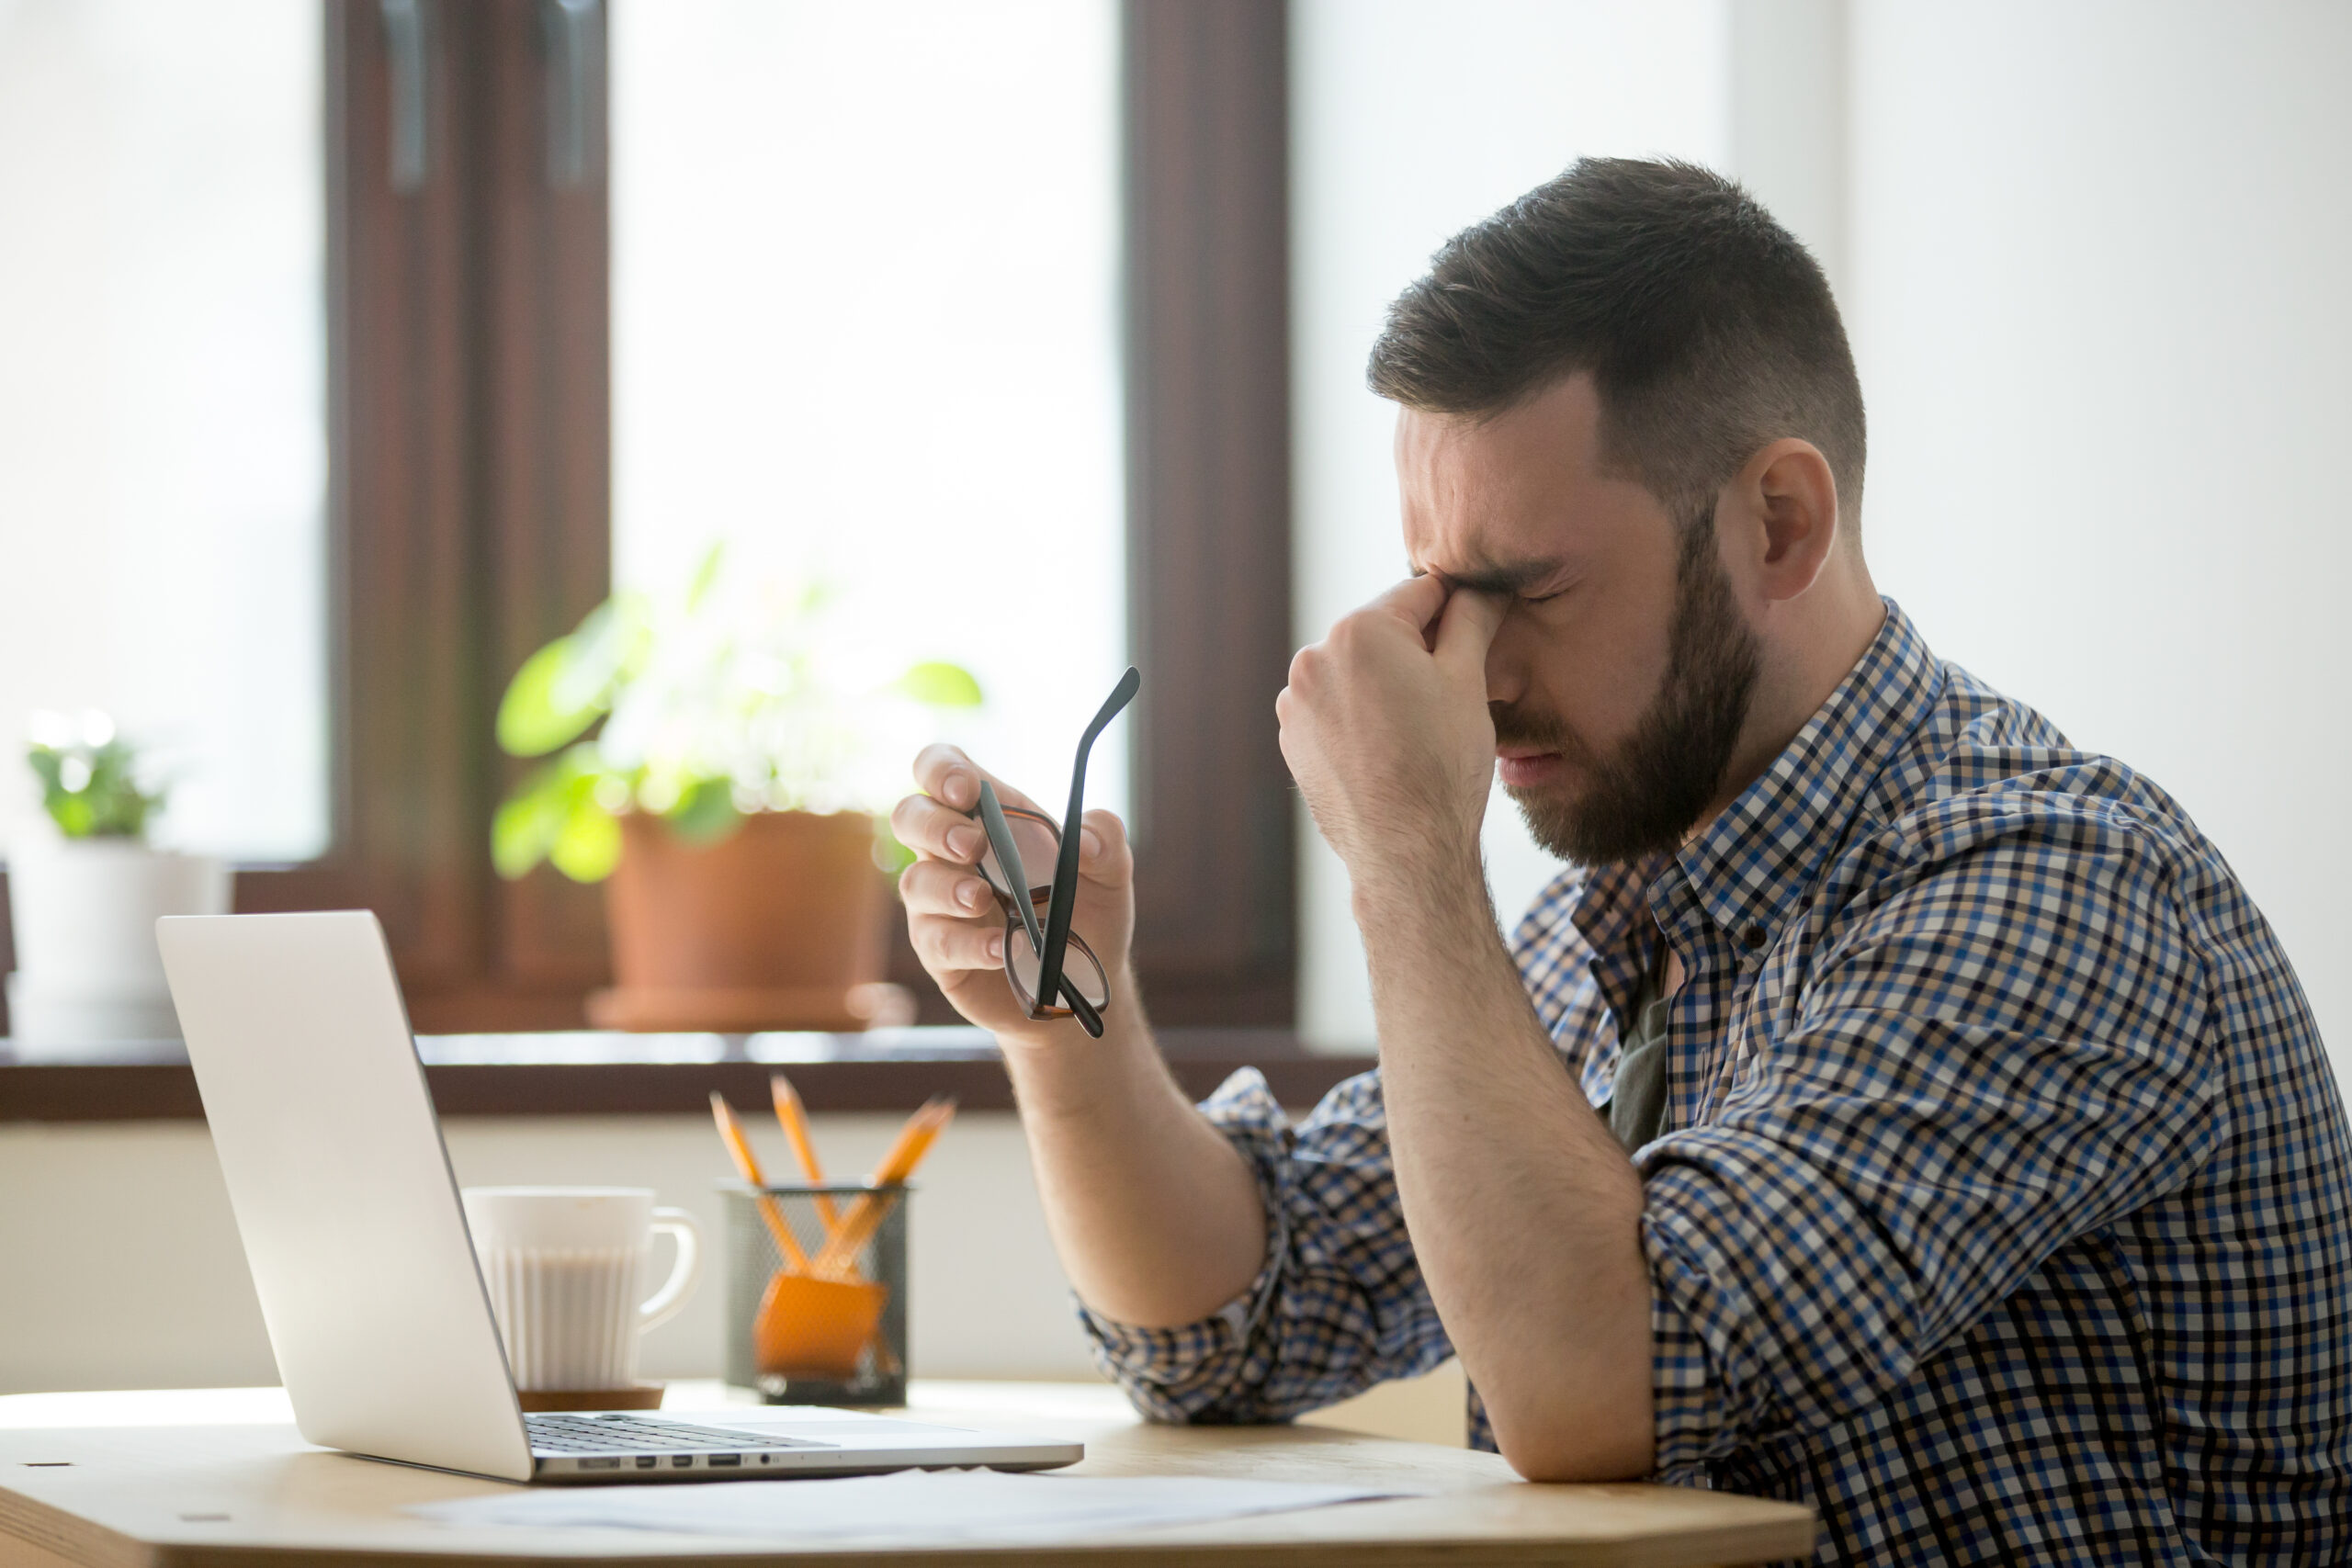 How to avoid a burnout during work from home?